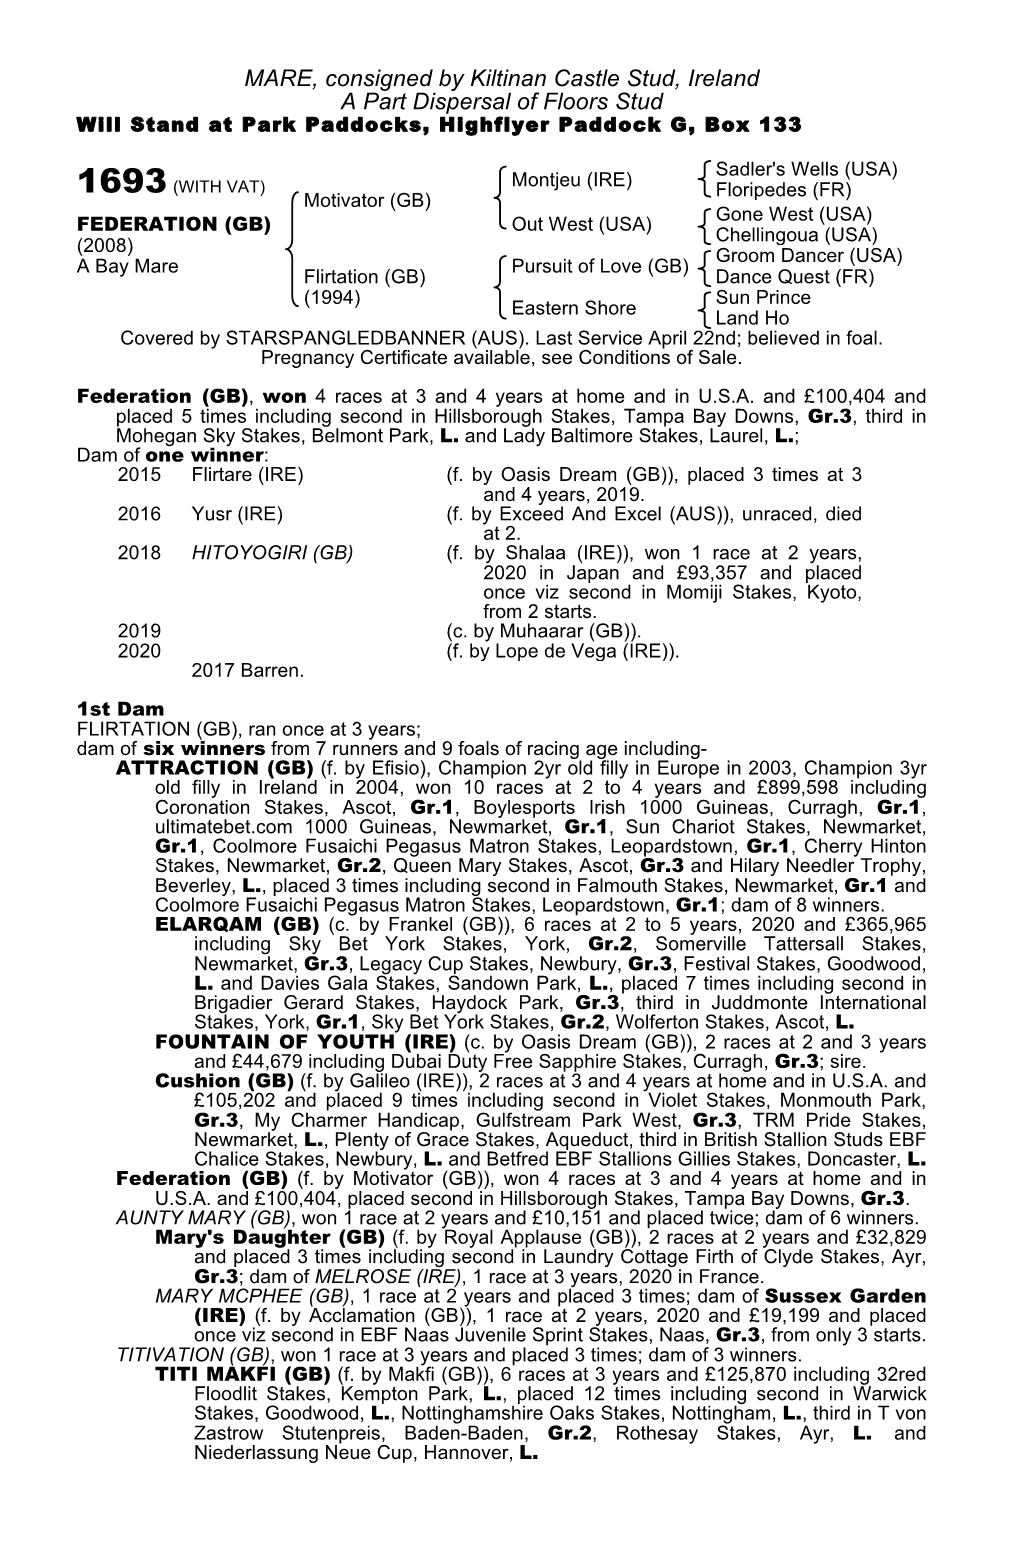 MARE, Consigned by Kiltinan Castle Stud, Ireland a Part Dispersal of Floors Stud Will Stand at Park Paddocks, Highflyer Paddock G, Box 133